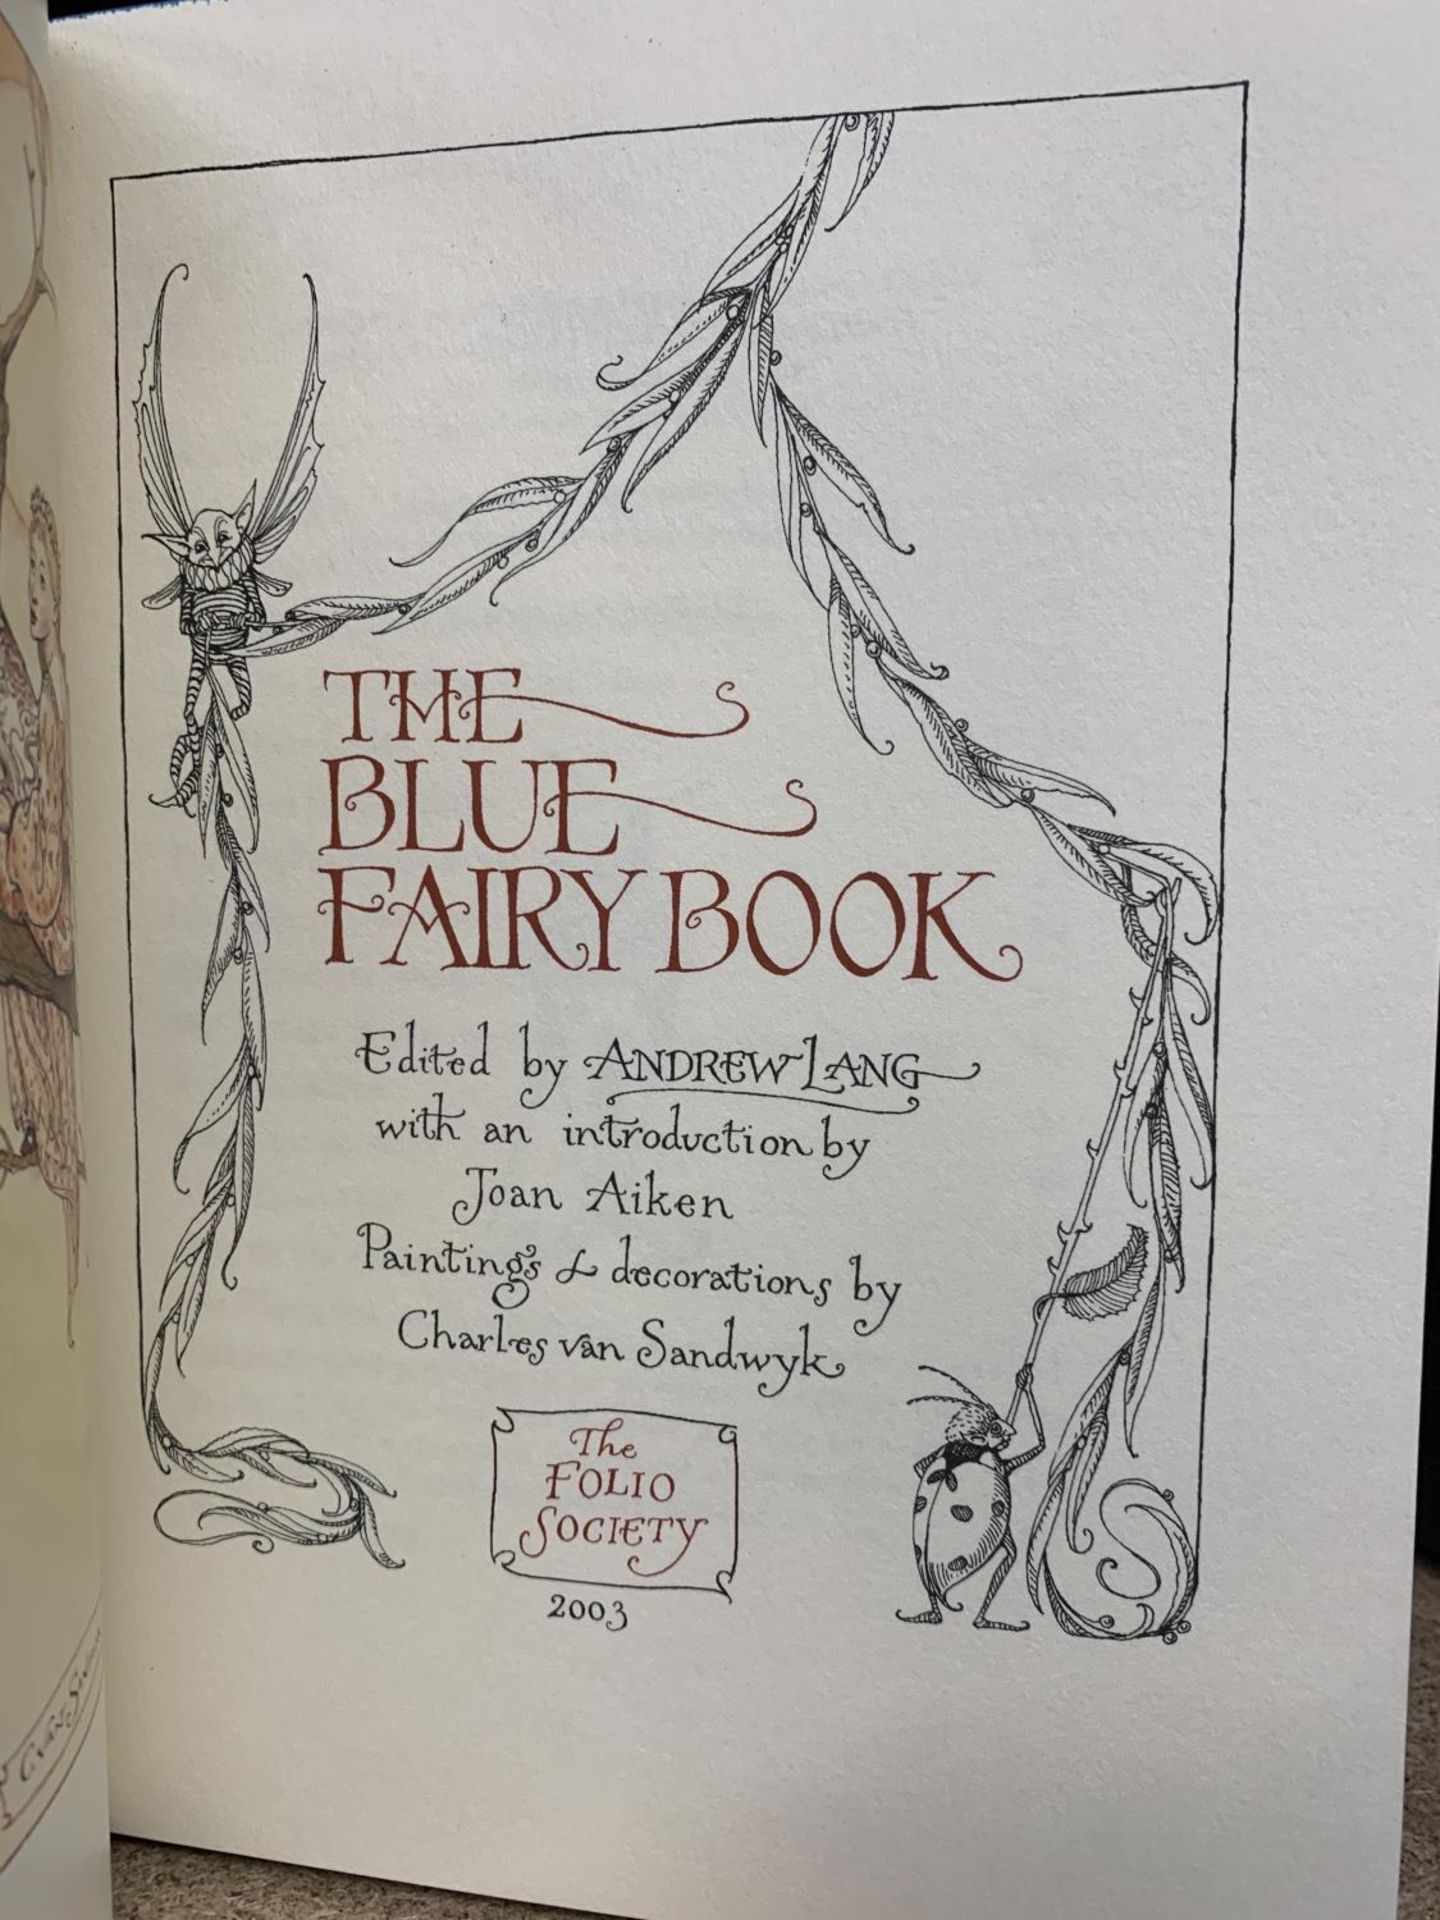 A COPY OF 'THE BLUE FAIRY BOOK' FROM THE FOLIO SOCIETY - Image 2 of 3